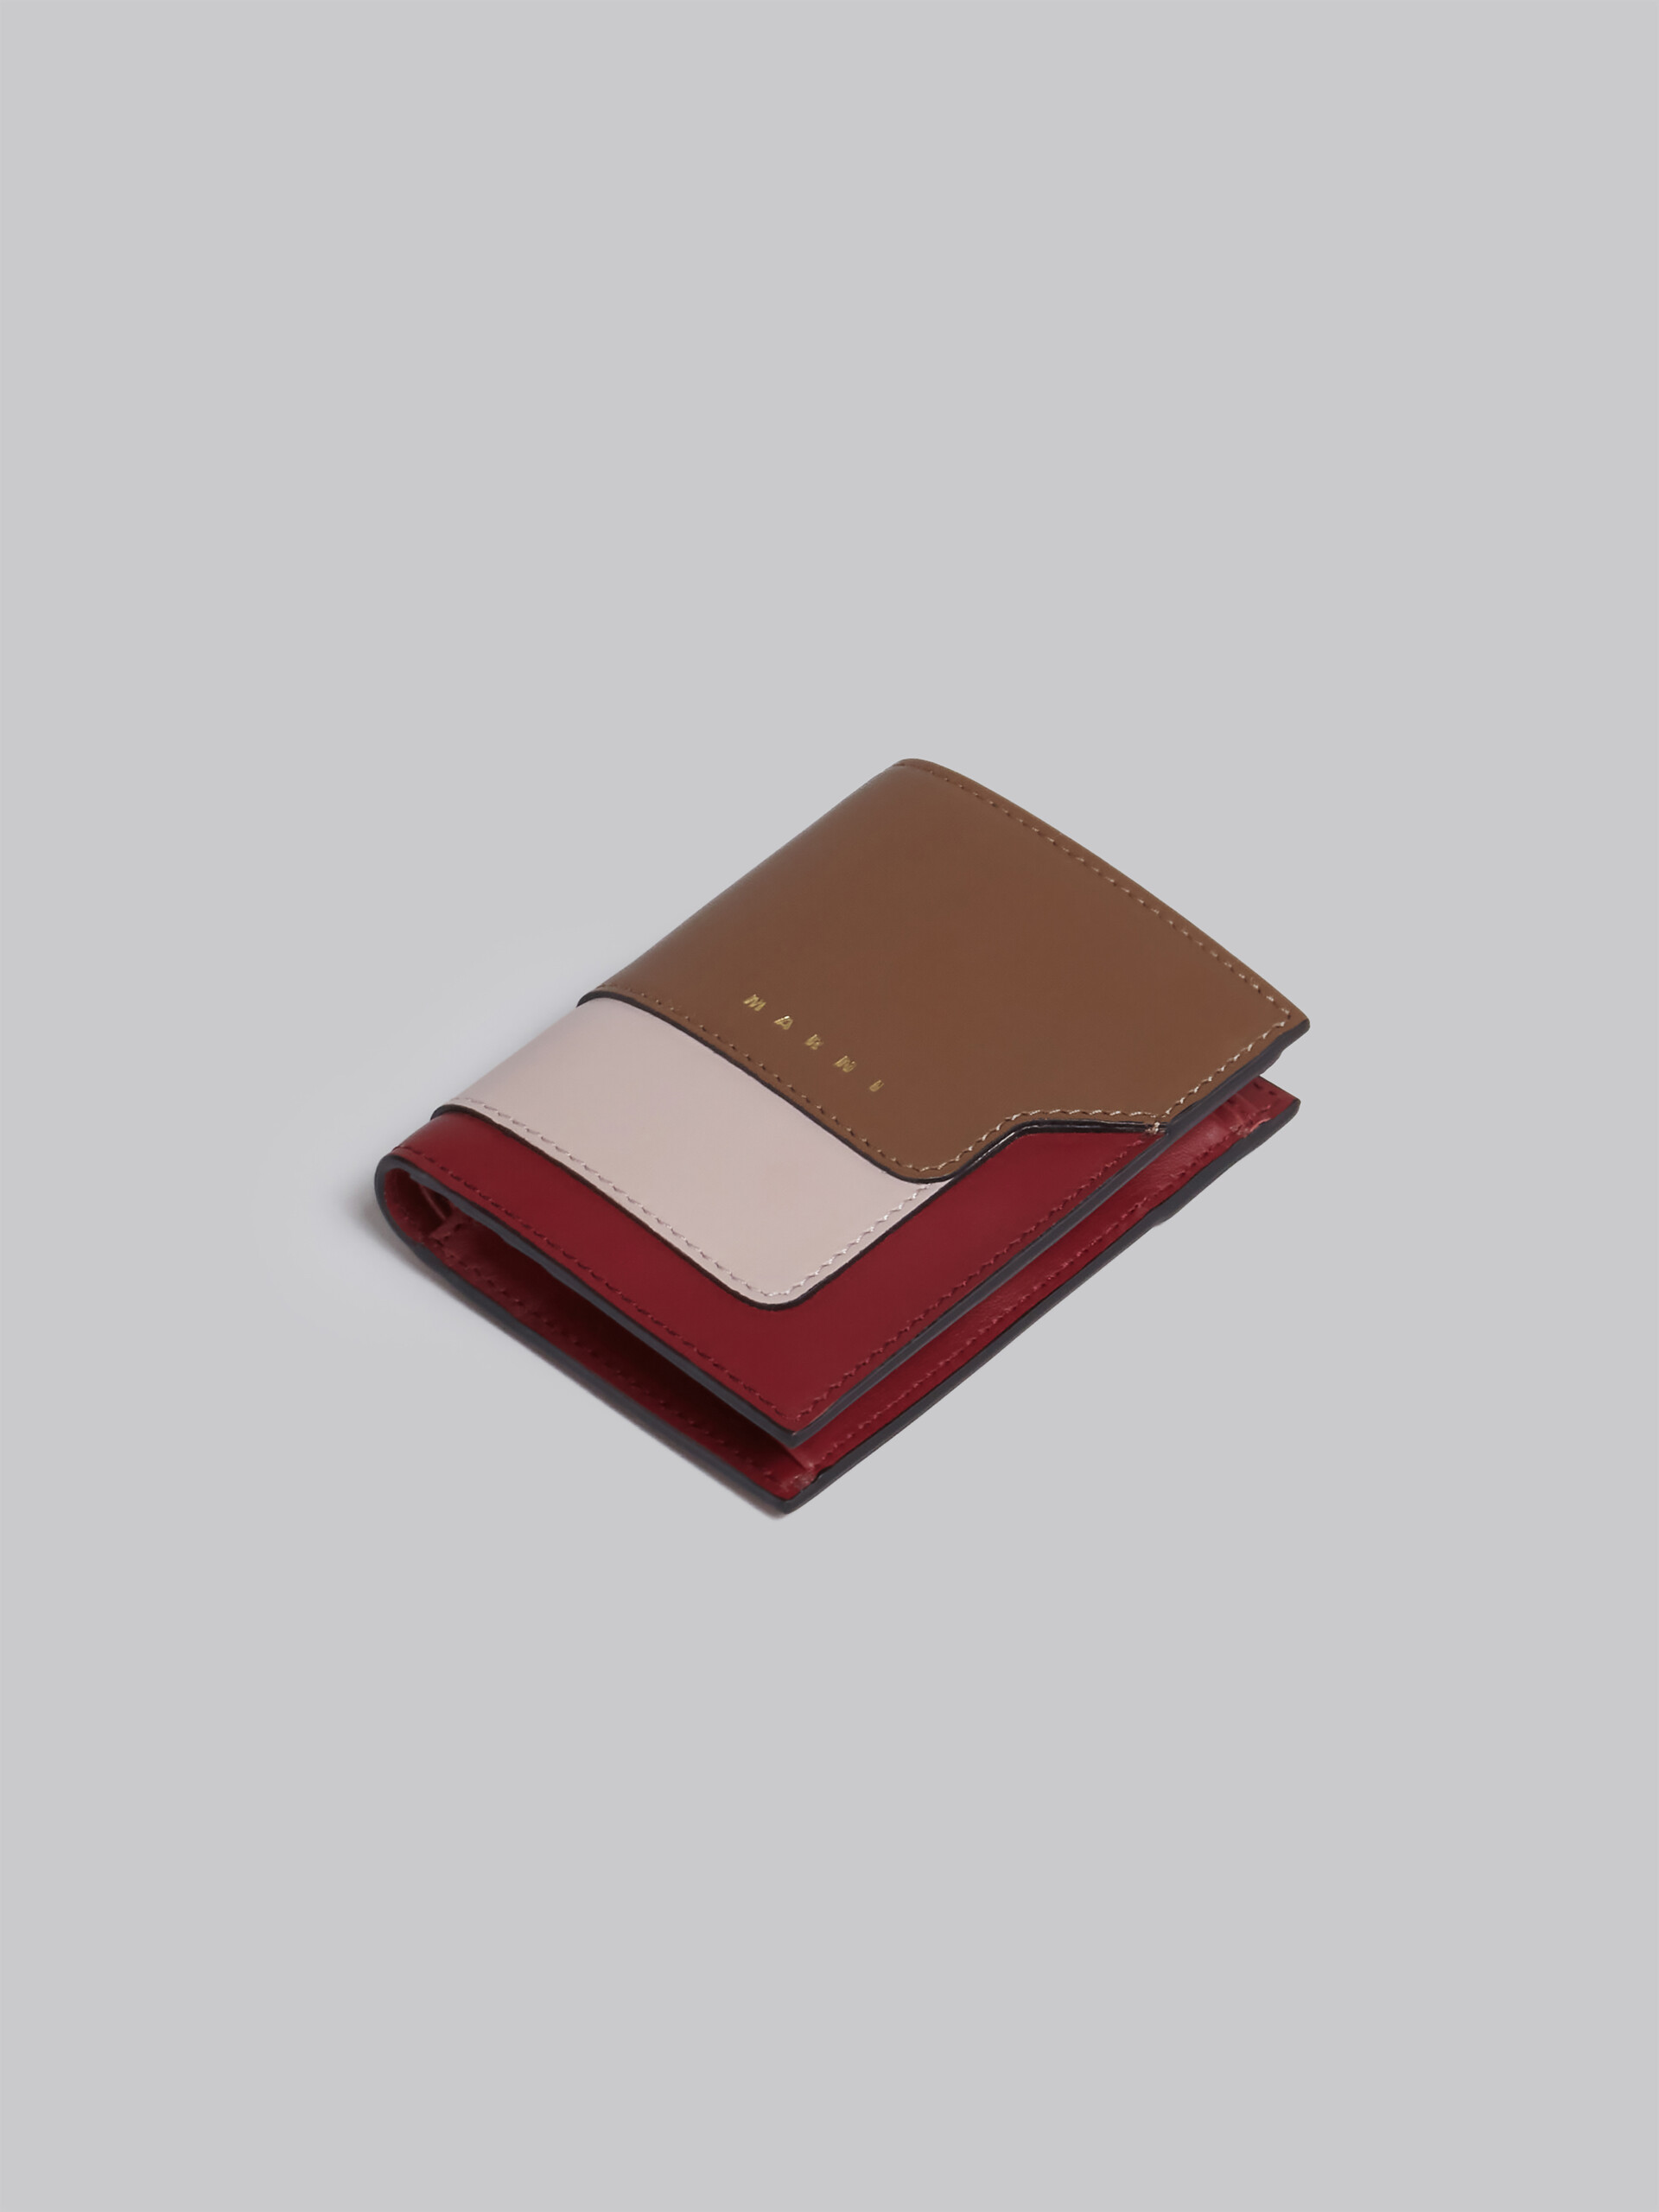 Bi-fold wallet in brown pink and burgundy saffiano leather - Wallets - Image 5